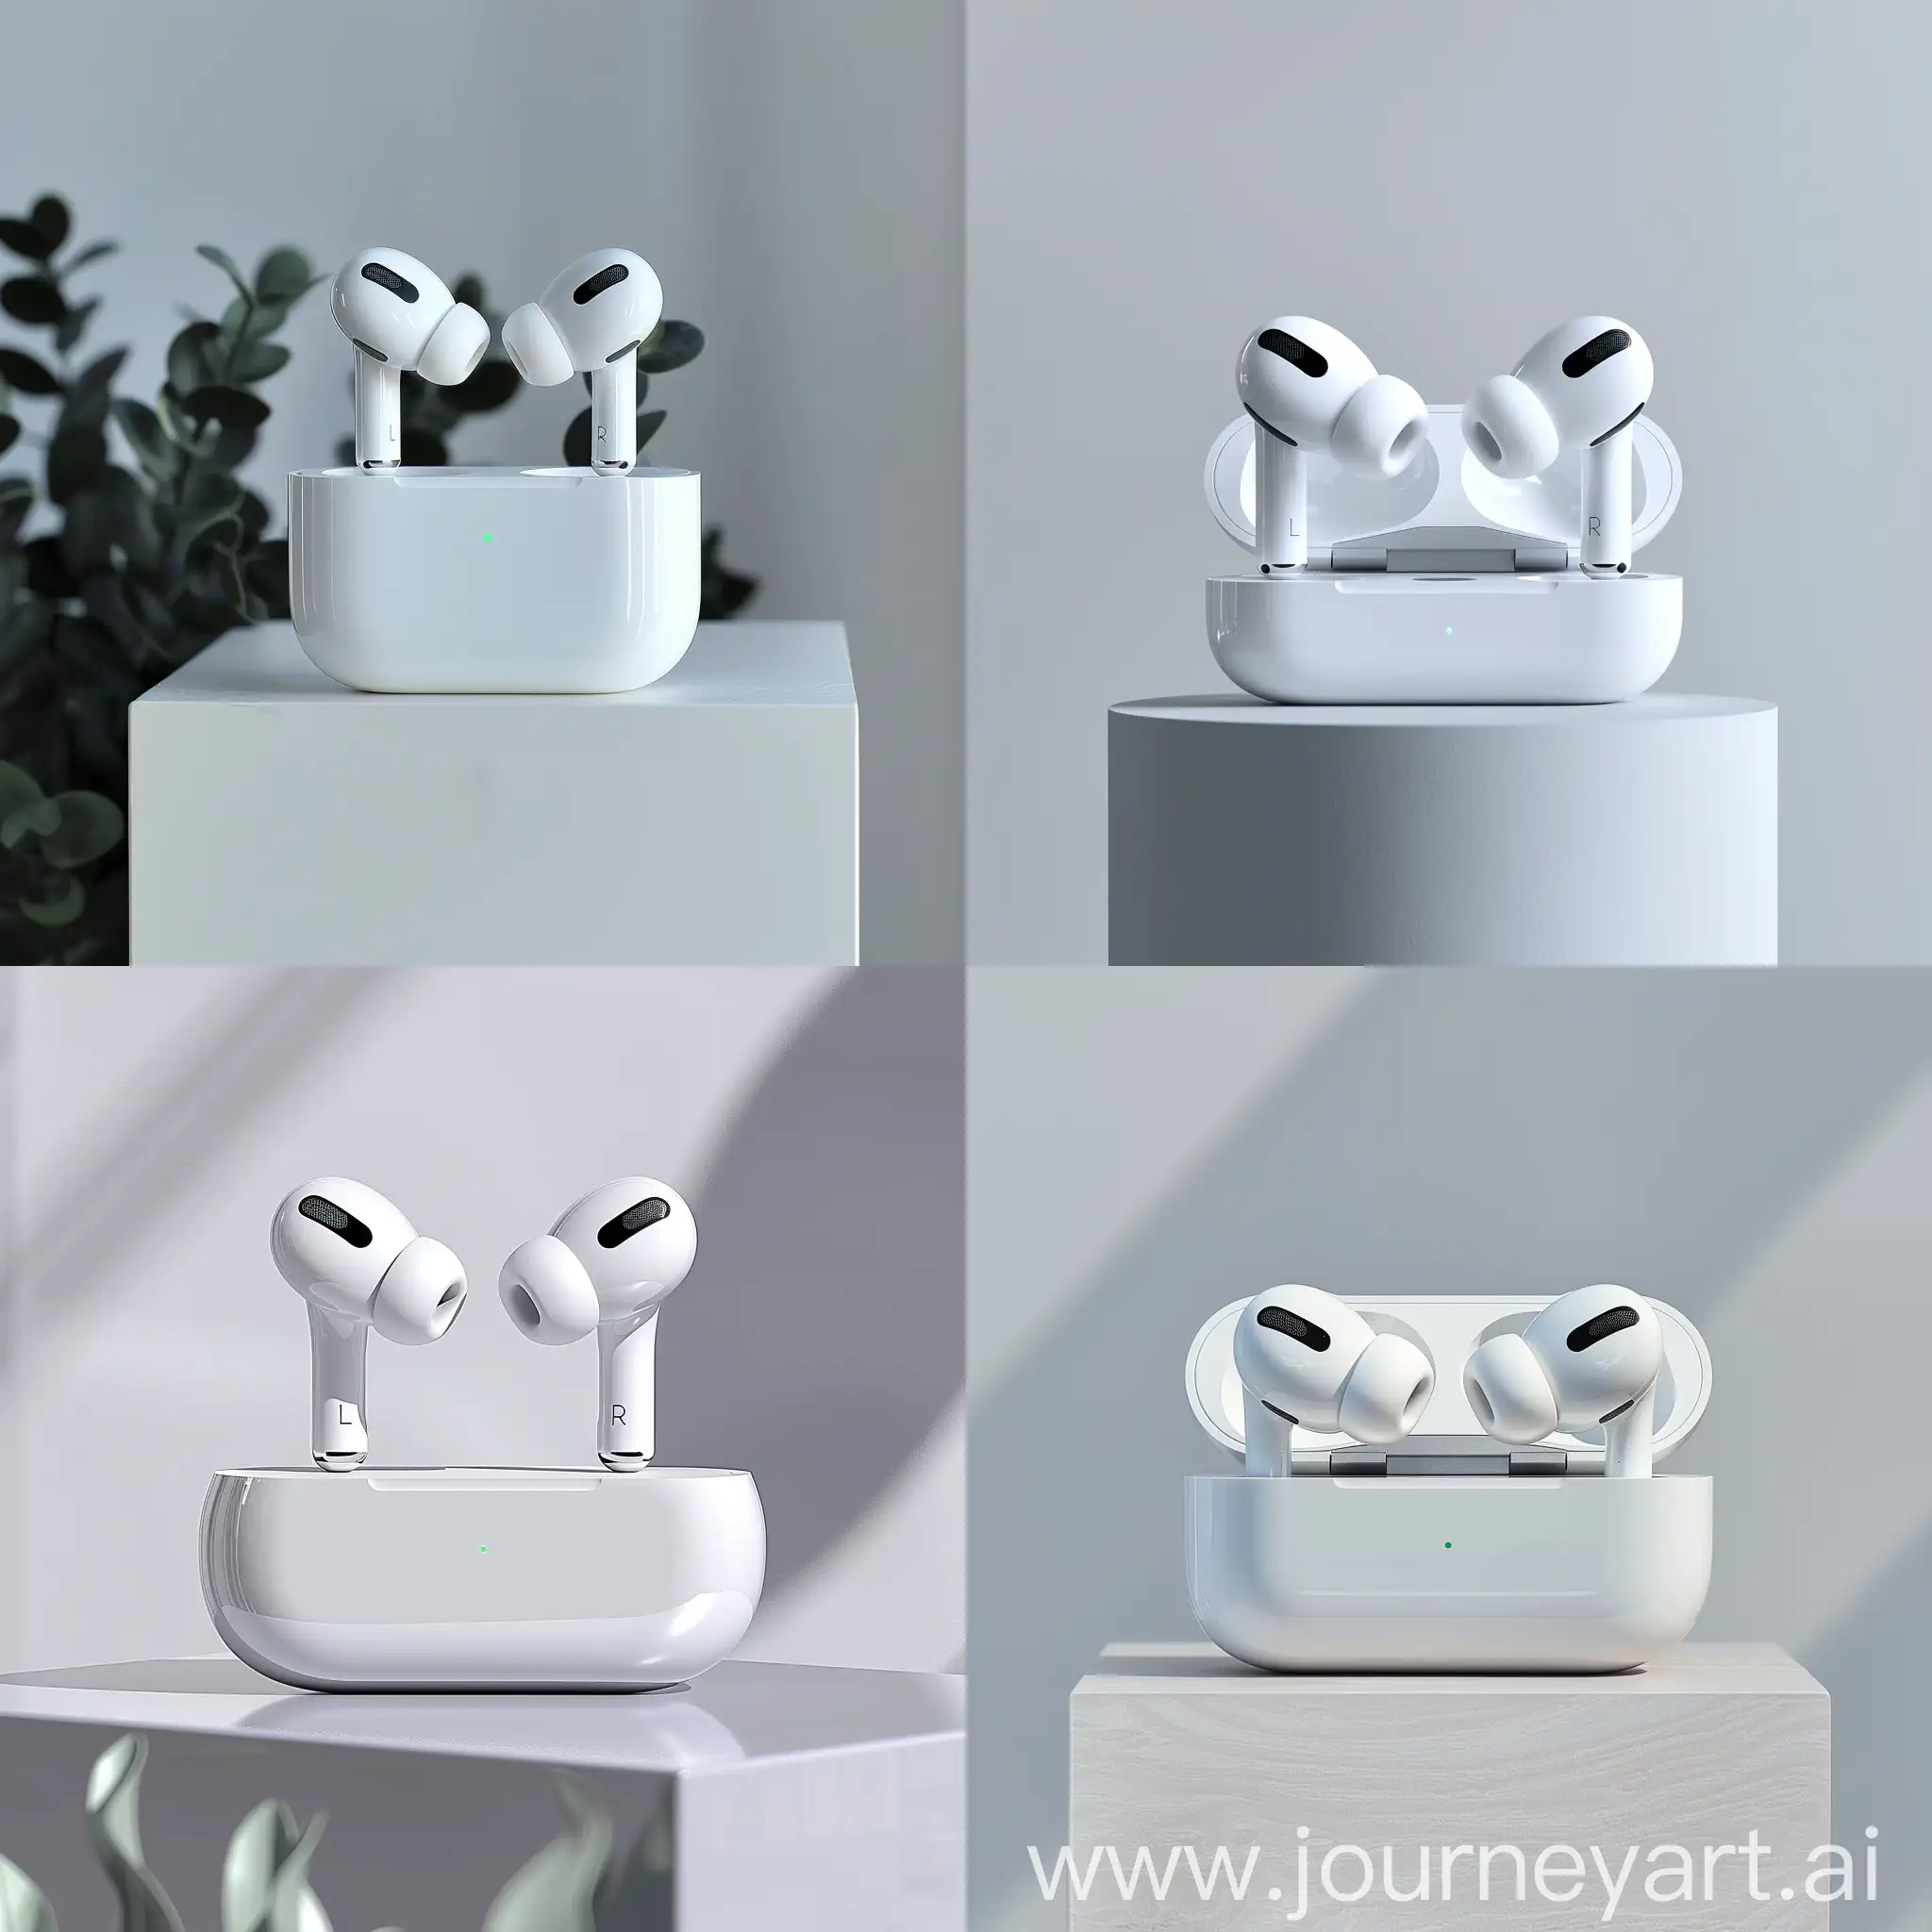 Professional-Airpod-2-Pro-Display-on-White-Podium-for-Effective-Advertising